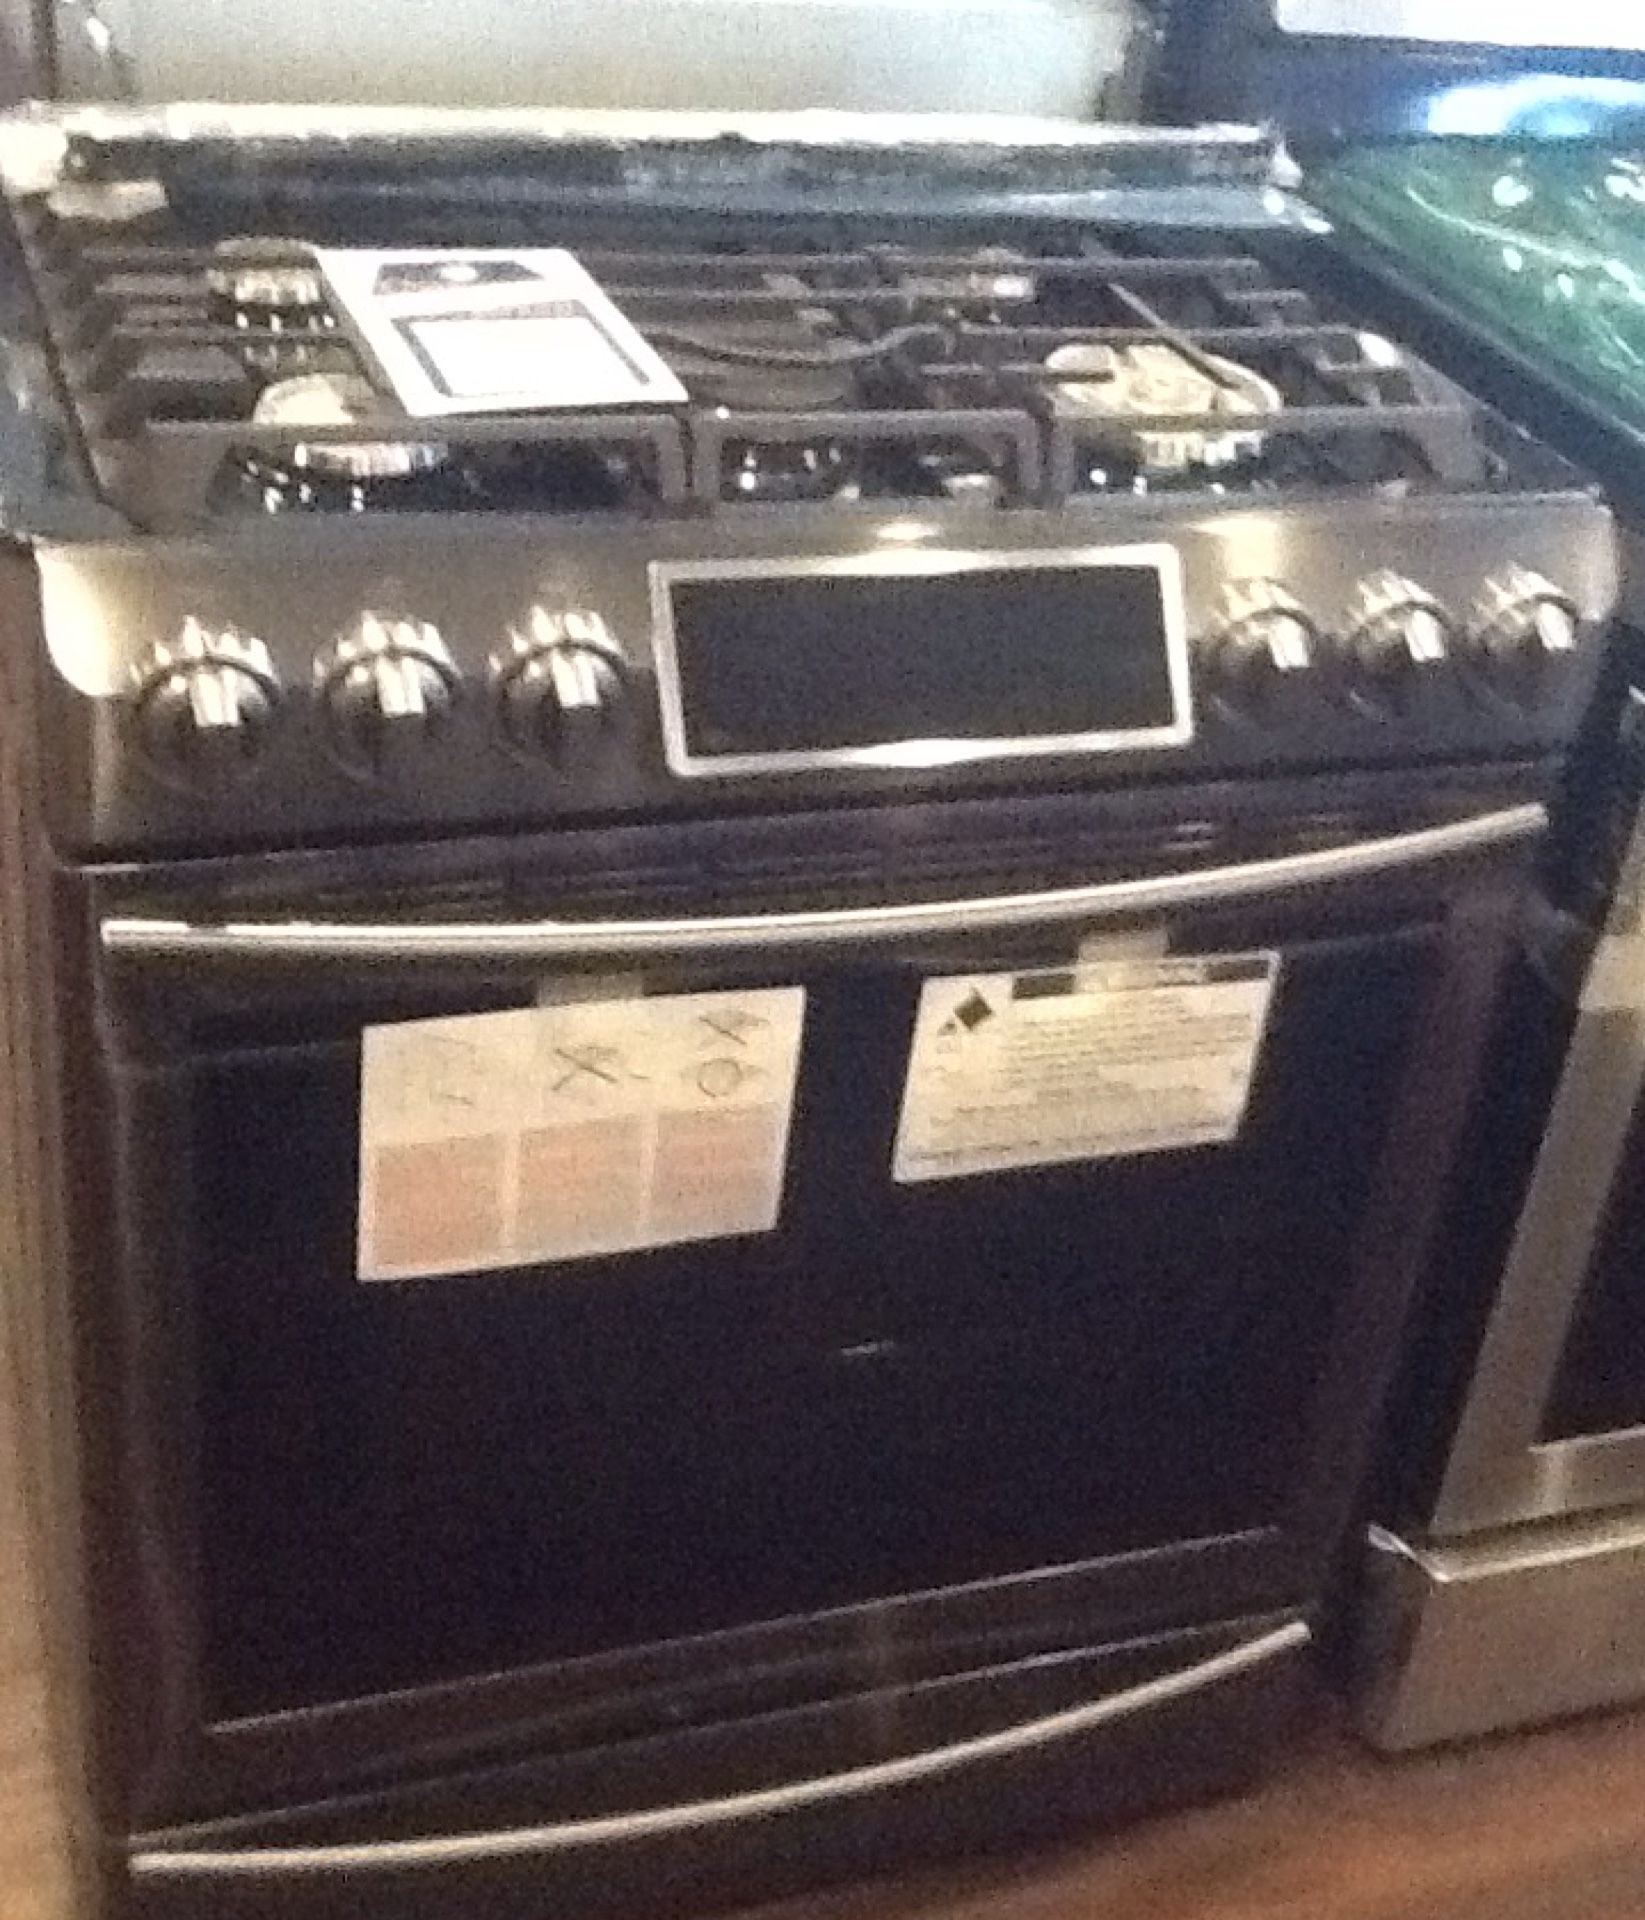 New open box Samsung gas range with convection NX58K9500WG/AA